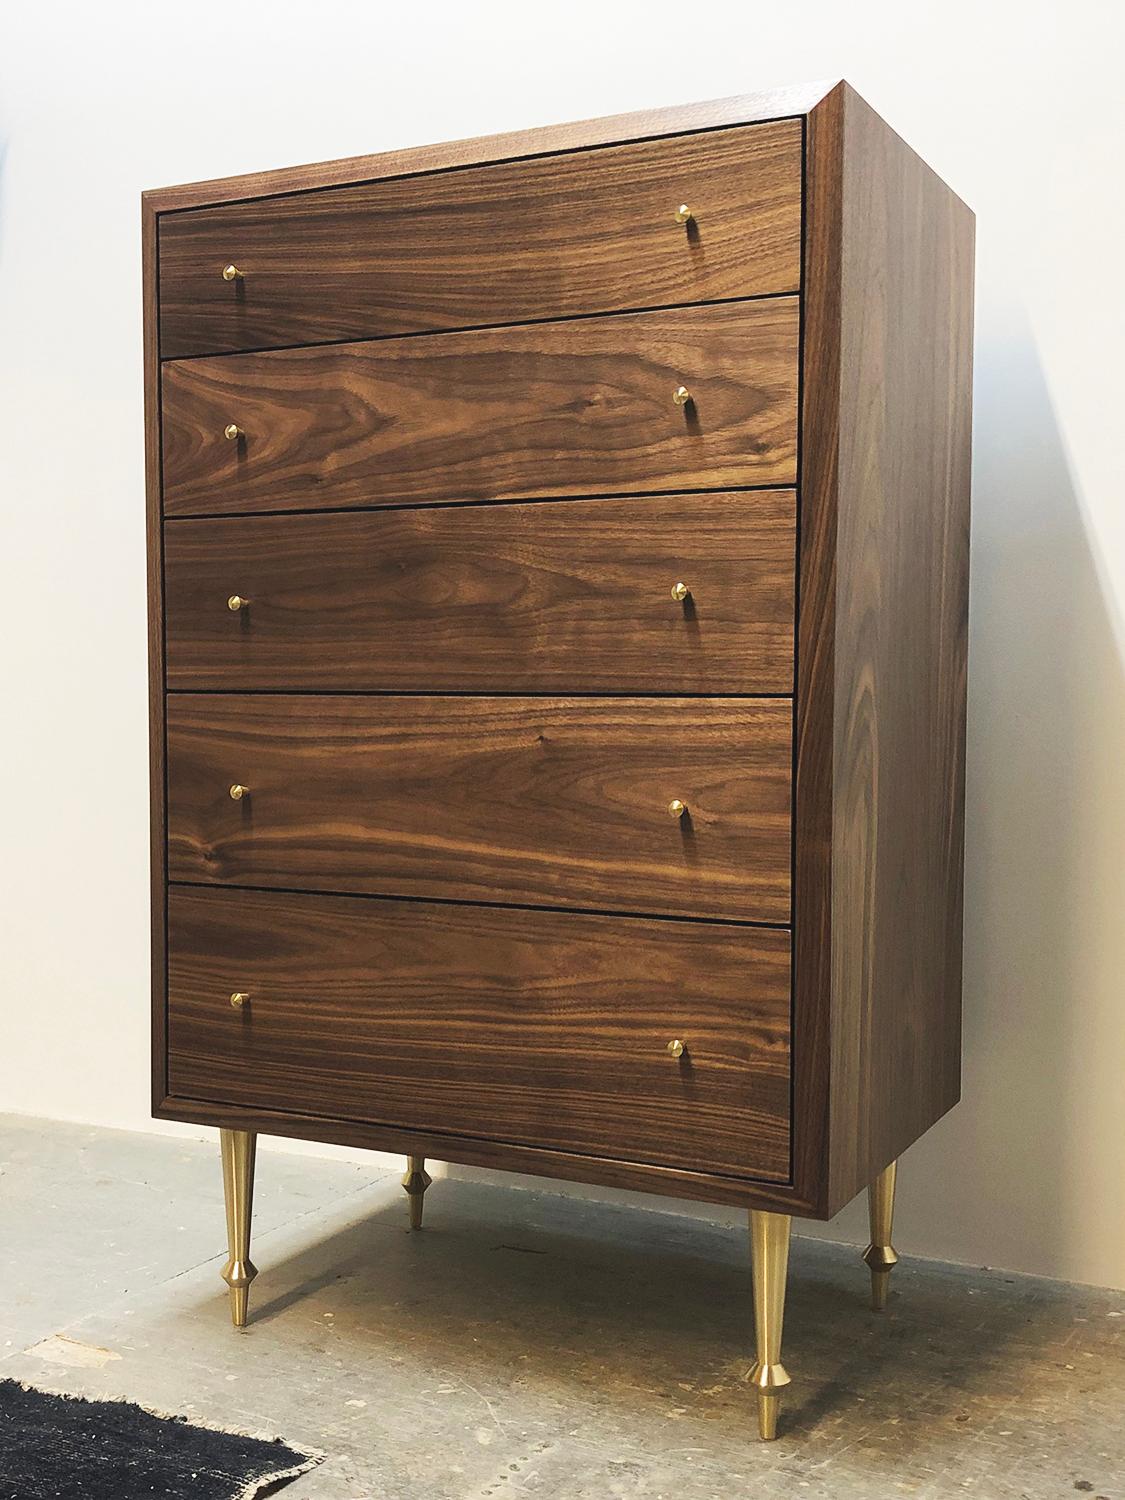 An elegantly simple dresser with graduated drawers, beautiful wood grain and lovely brass hardware.
Solid walnut with turned brass legs and drawer pulls.
Dimensions: 42” H x 26” W x 18” D.
 